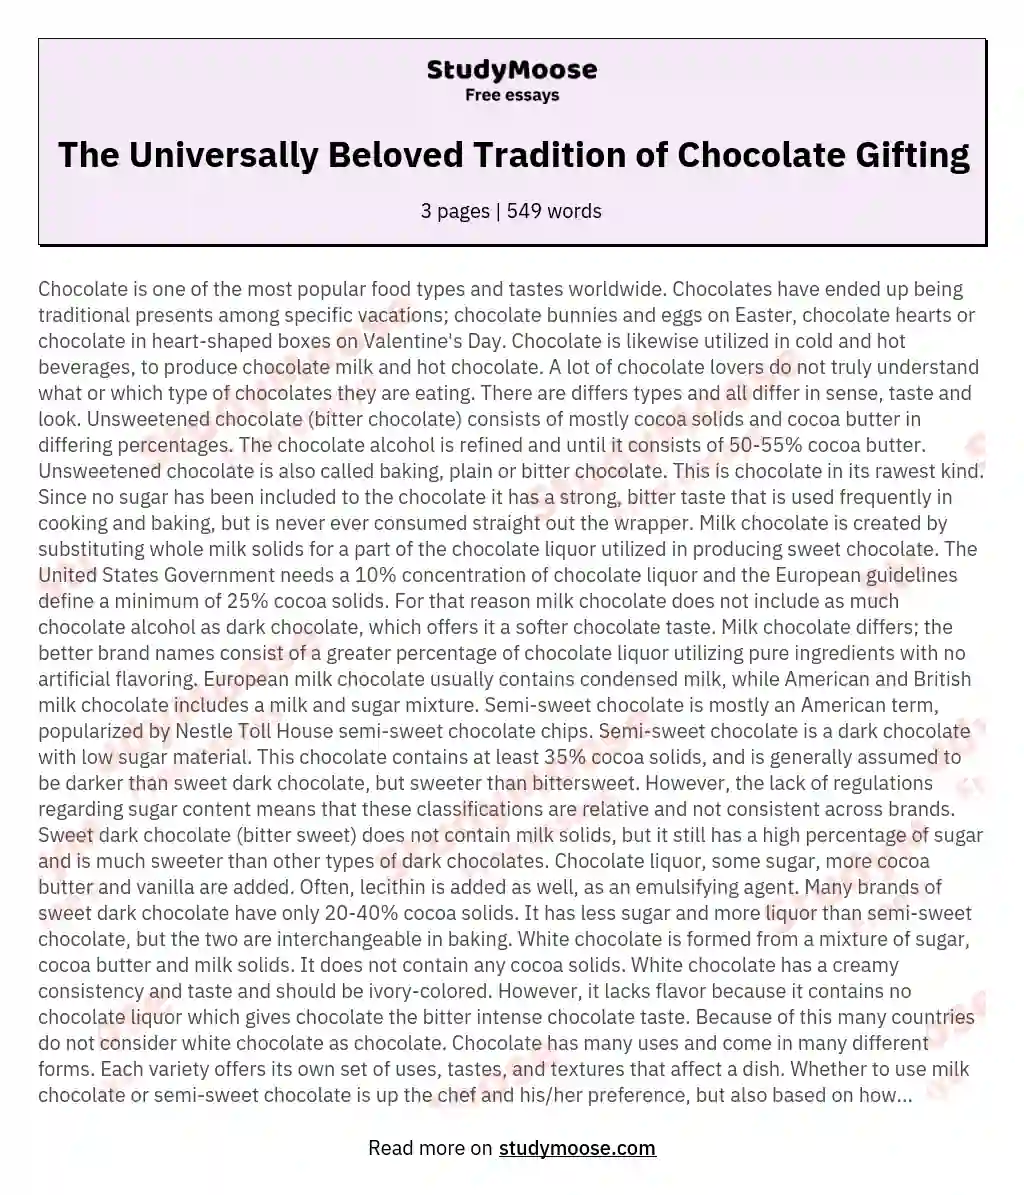 The Universally Beloved Tradition of Chocolate Gifting essay